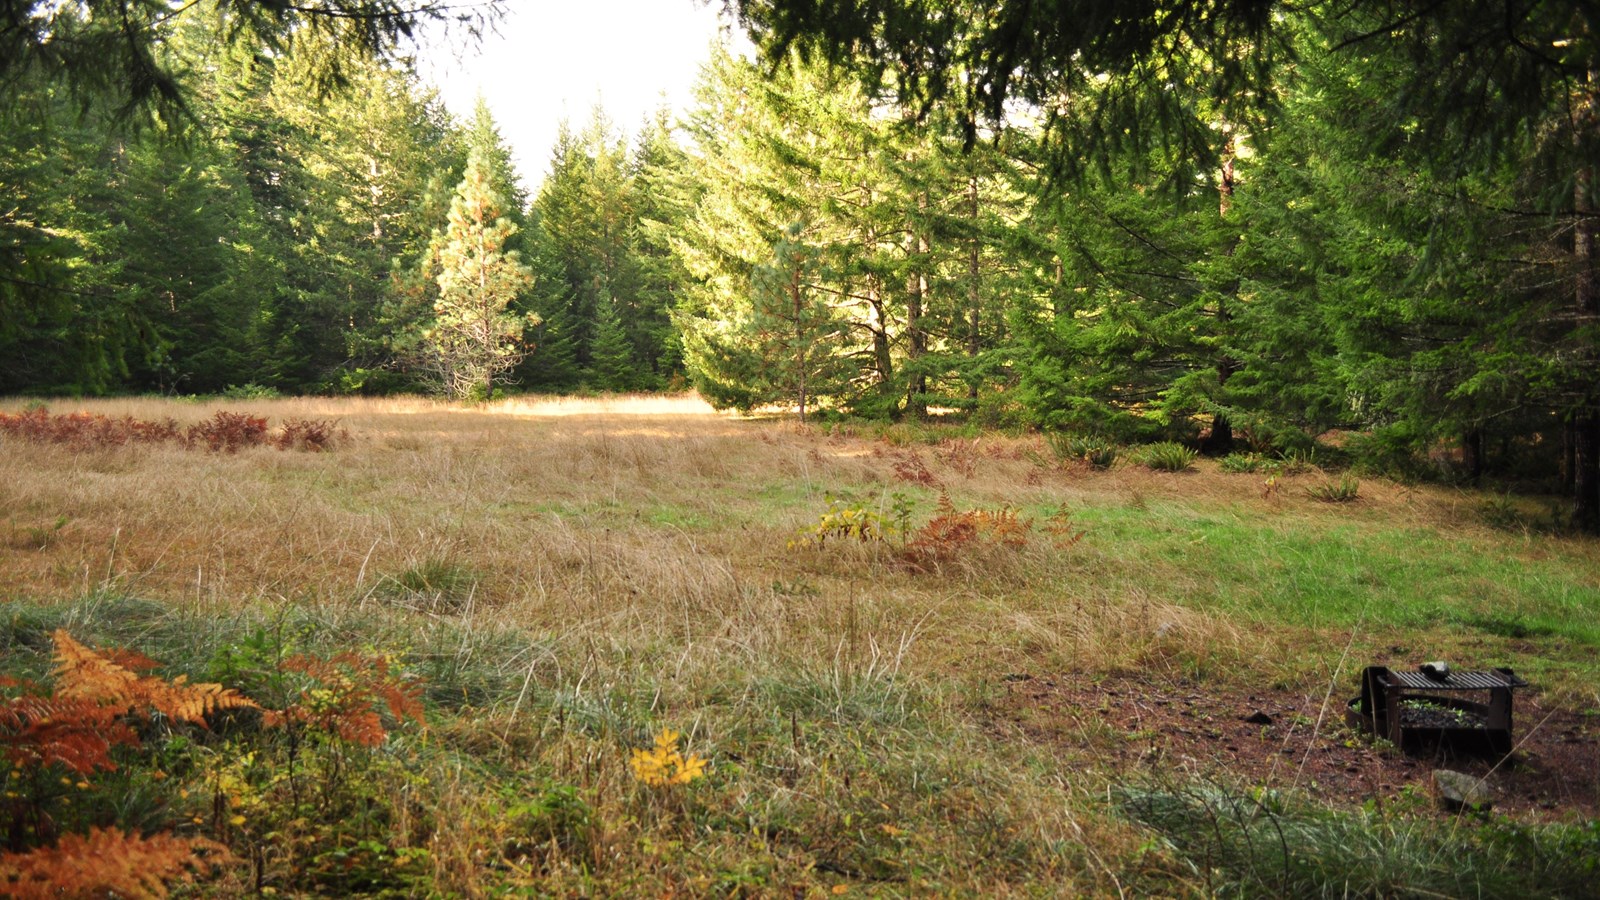 Douglas fir trees on a grassy slope. A campfire ring is to the right.